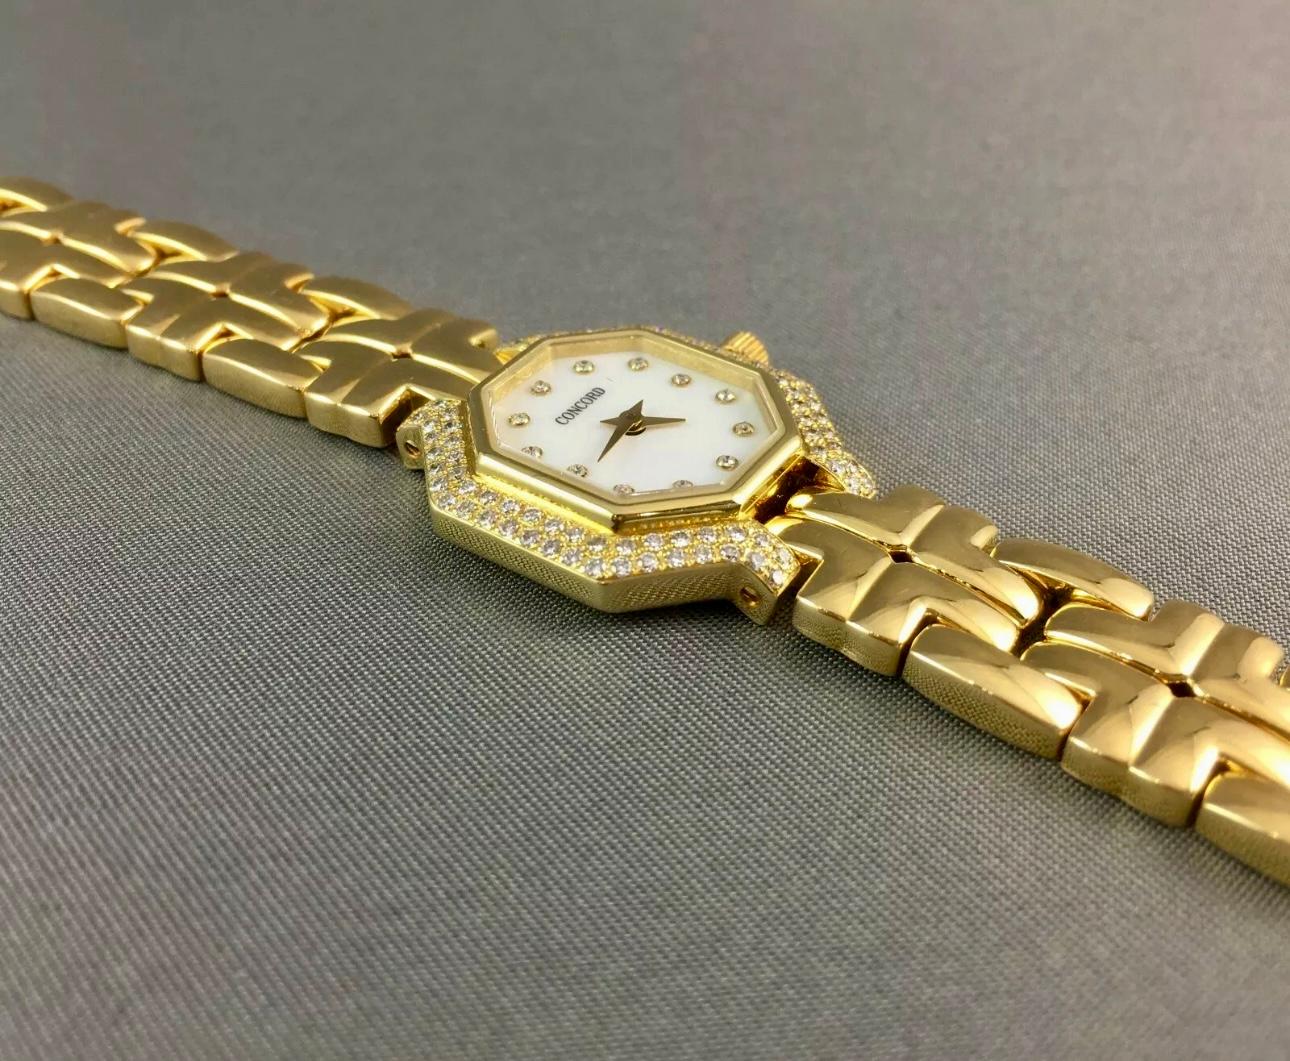 Modern Concord 18k Gold & Diamond Ladies Watch Ref. #51.25.160, Mother of Pearl Dial For Sale